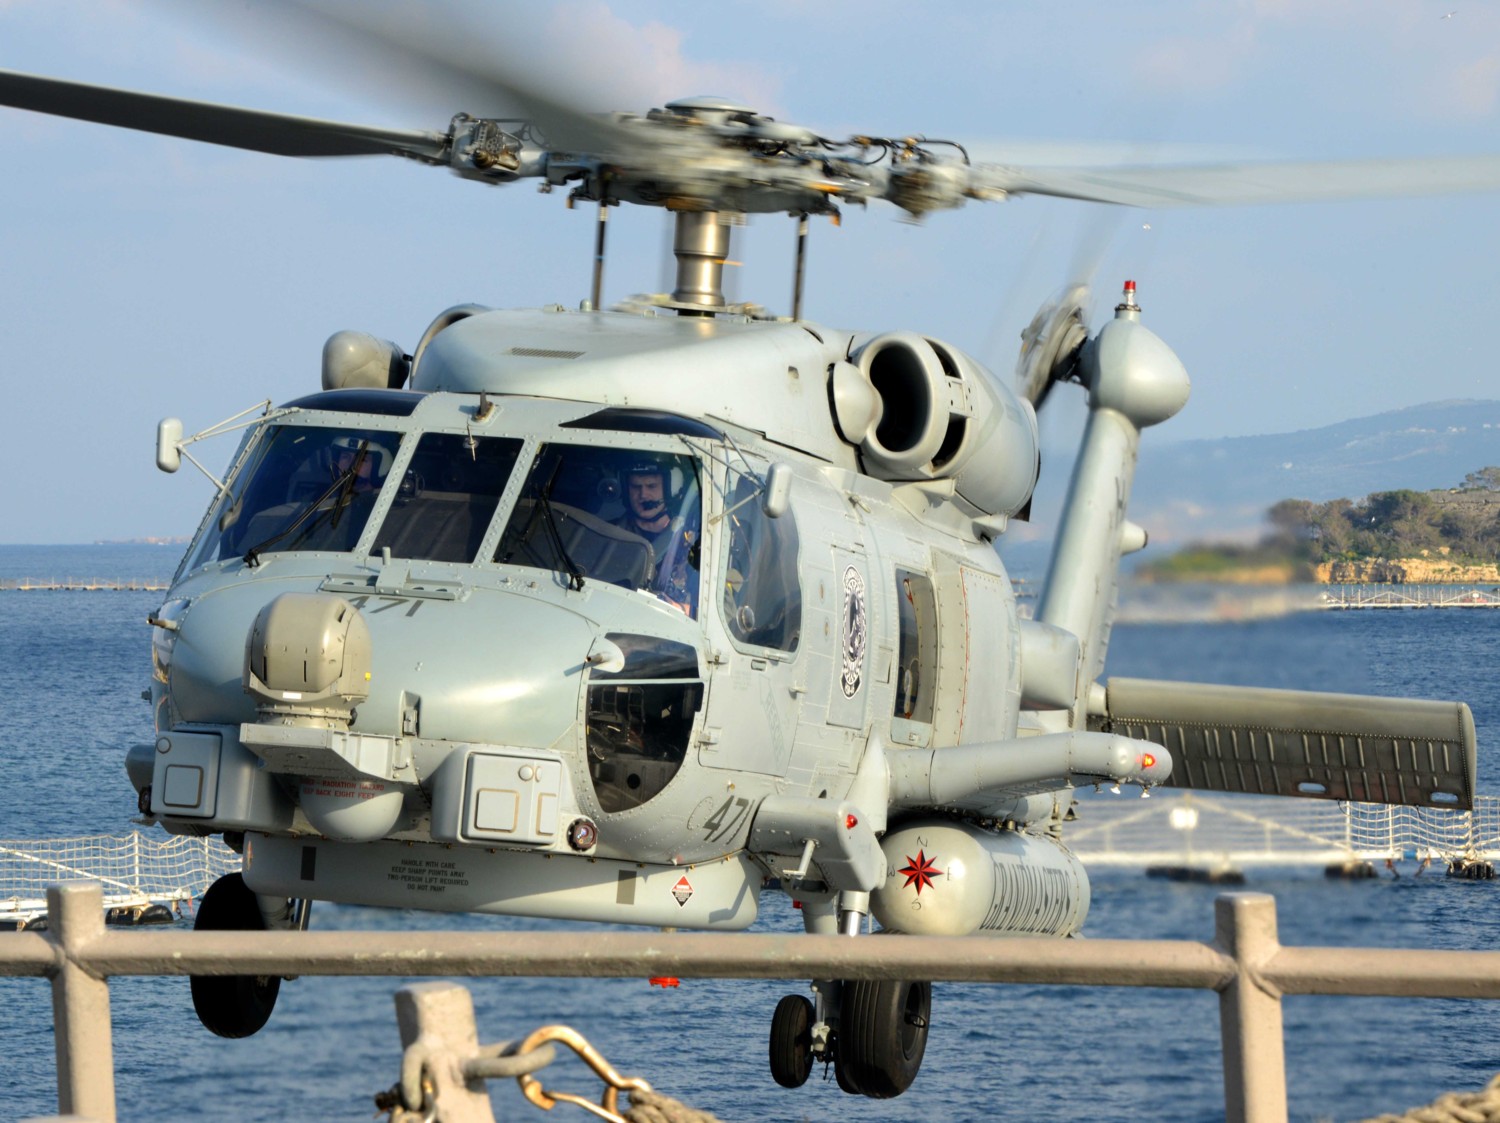 hsm-46 grandmasters helicopter maritime strike squadron mh-60r seahawk 2014 30 uss taylor ffg-50